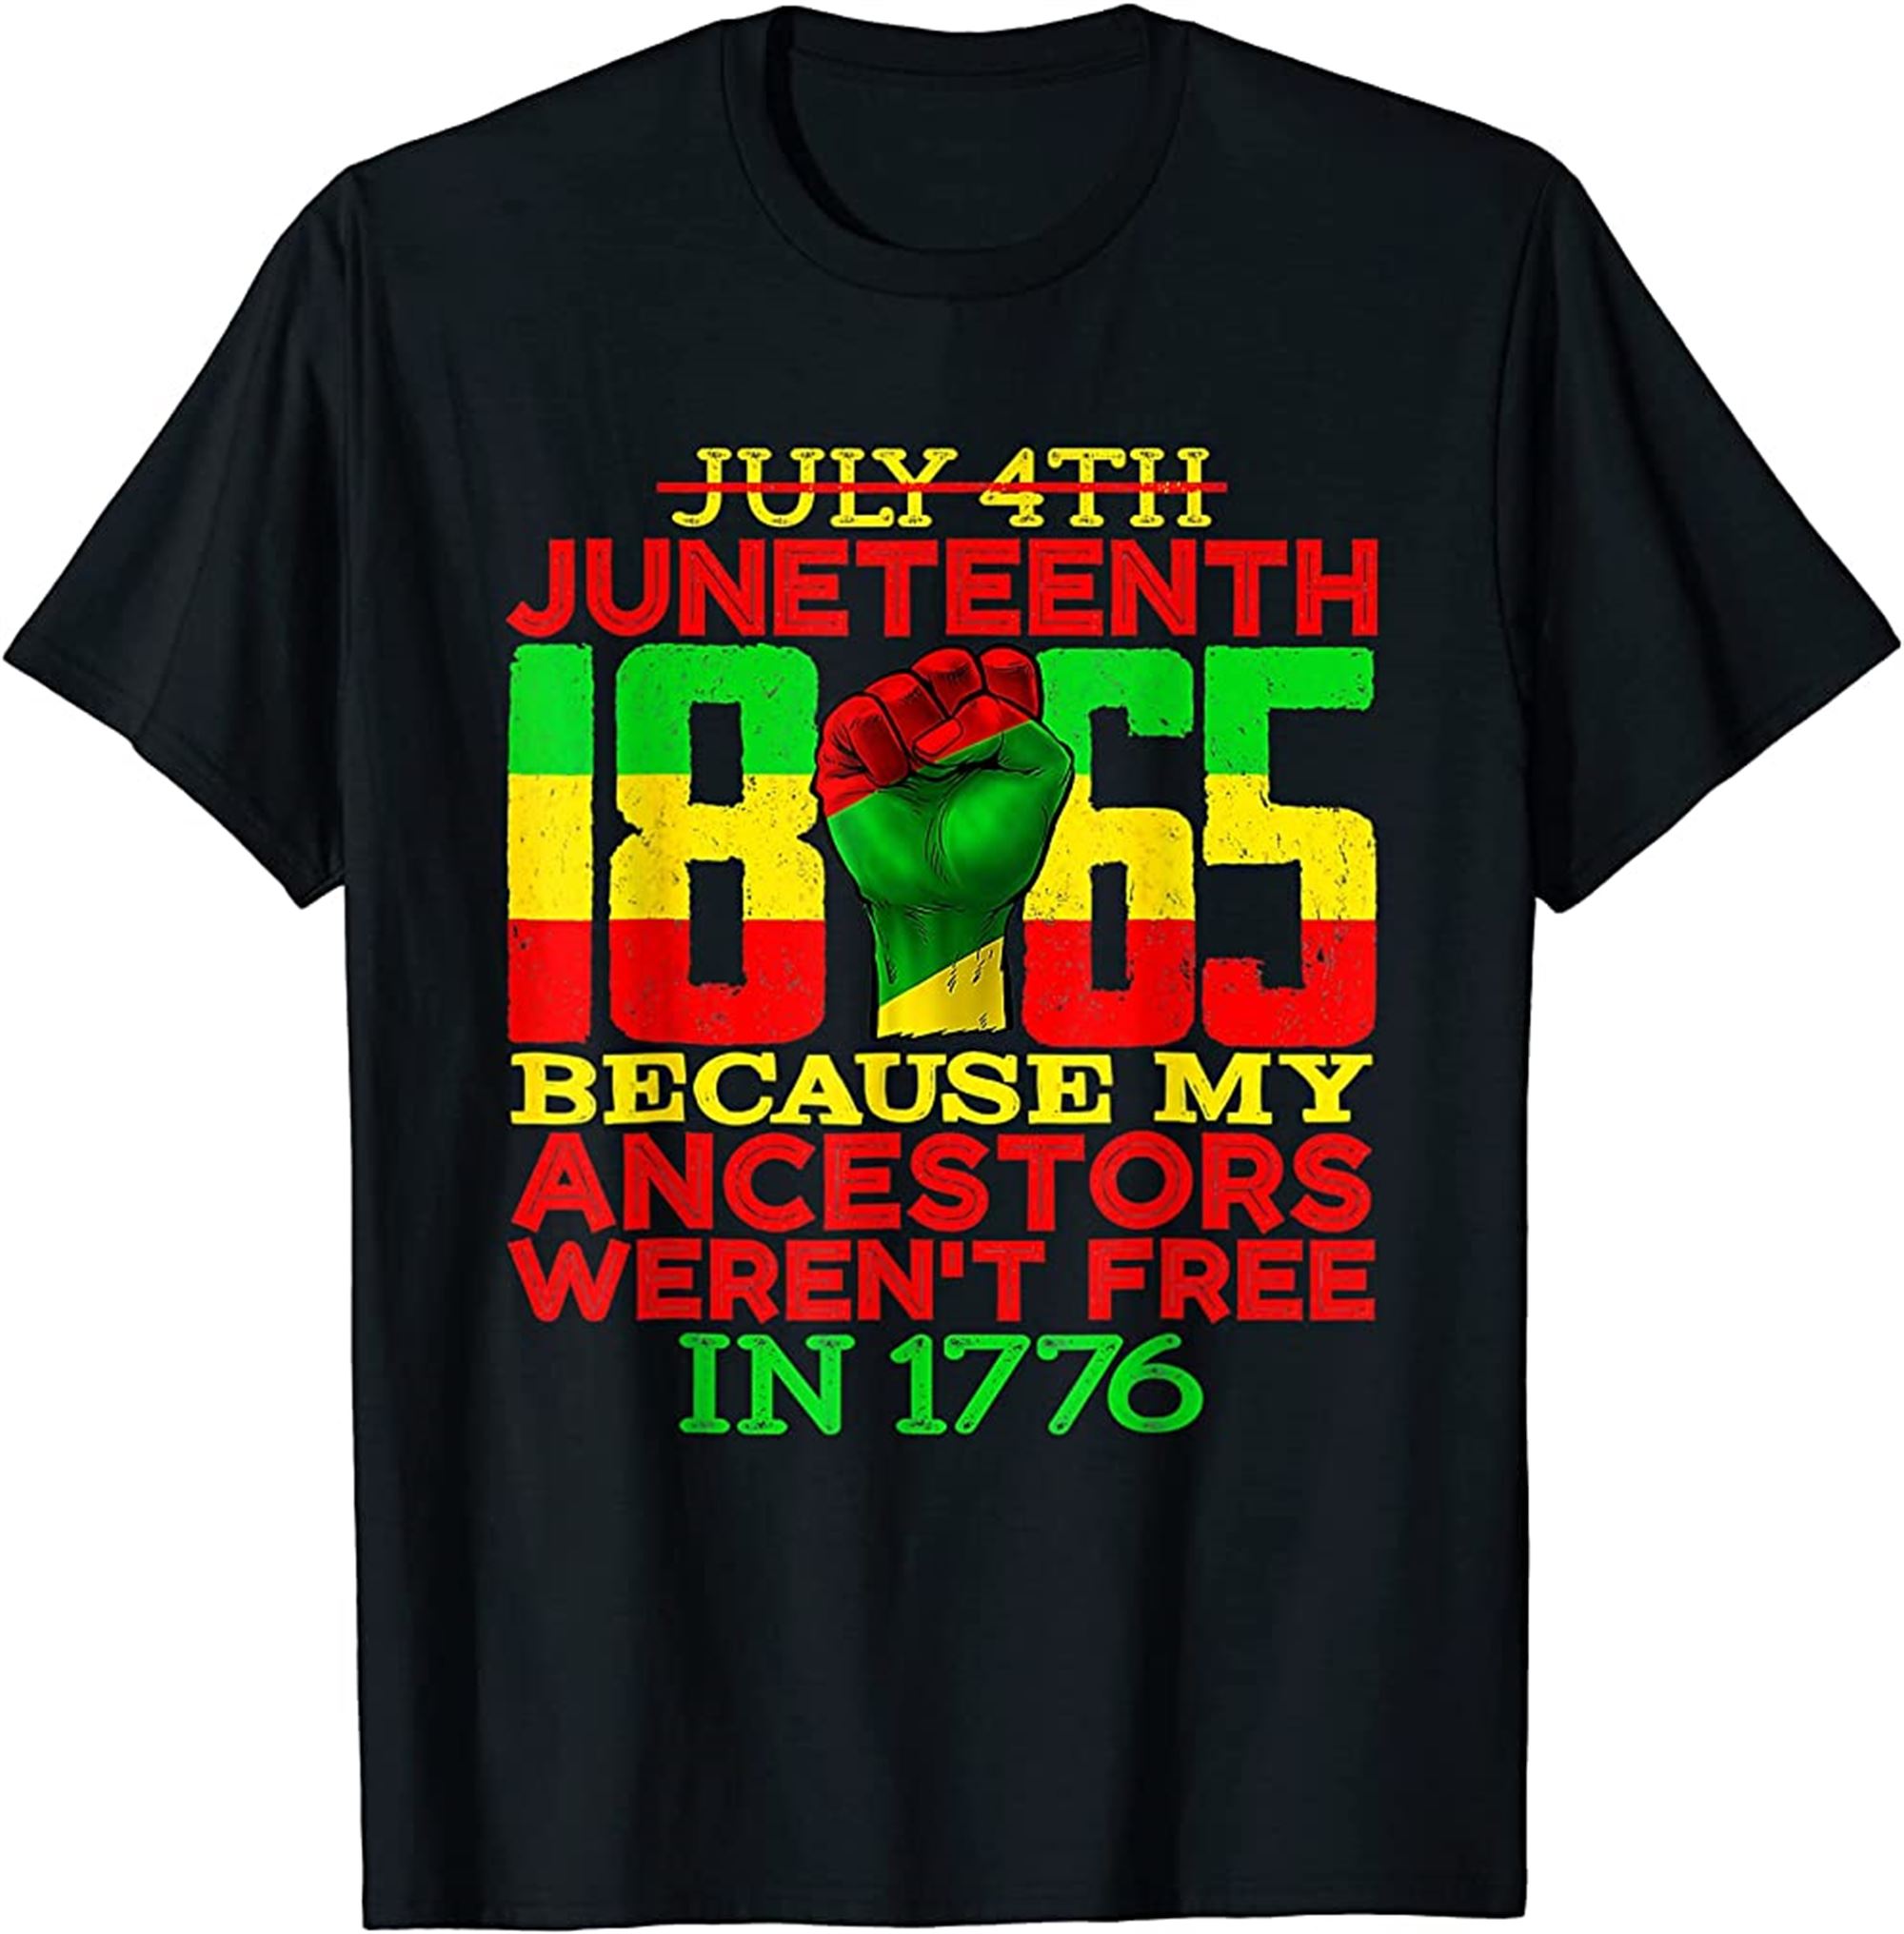 Juneteenth 1865 July 4th Because My Ancestors Werent Free T-shirt Full Size Up To 5xl